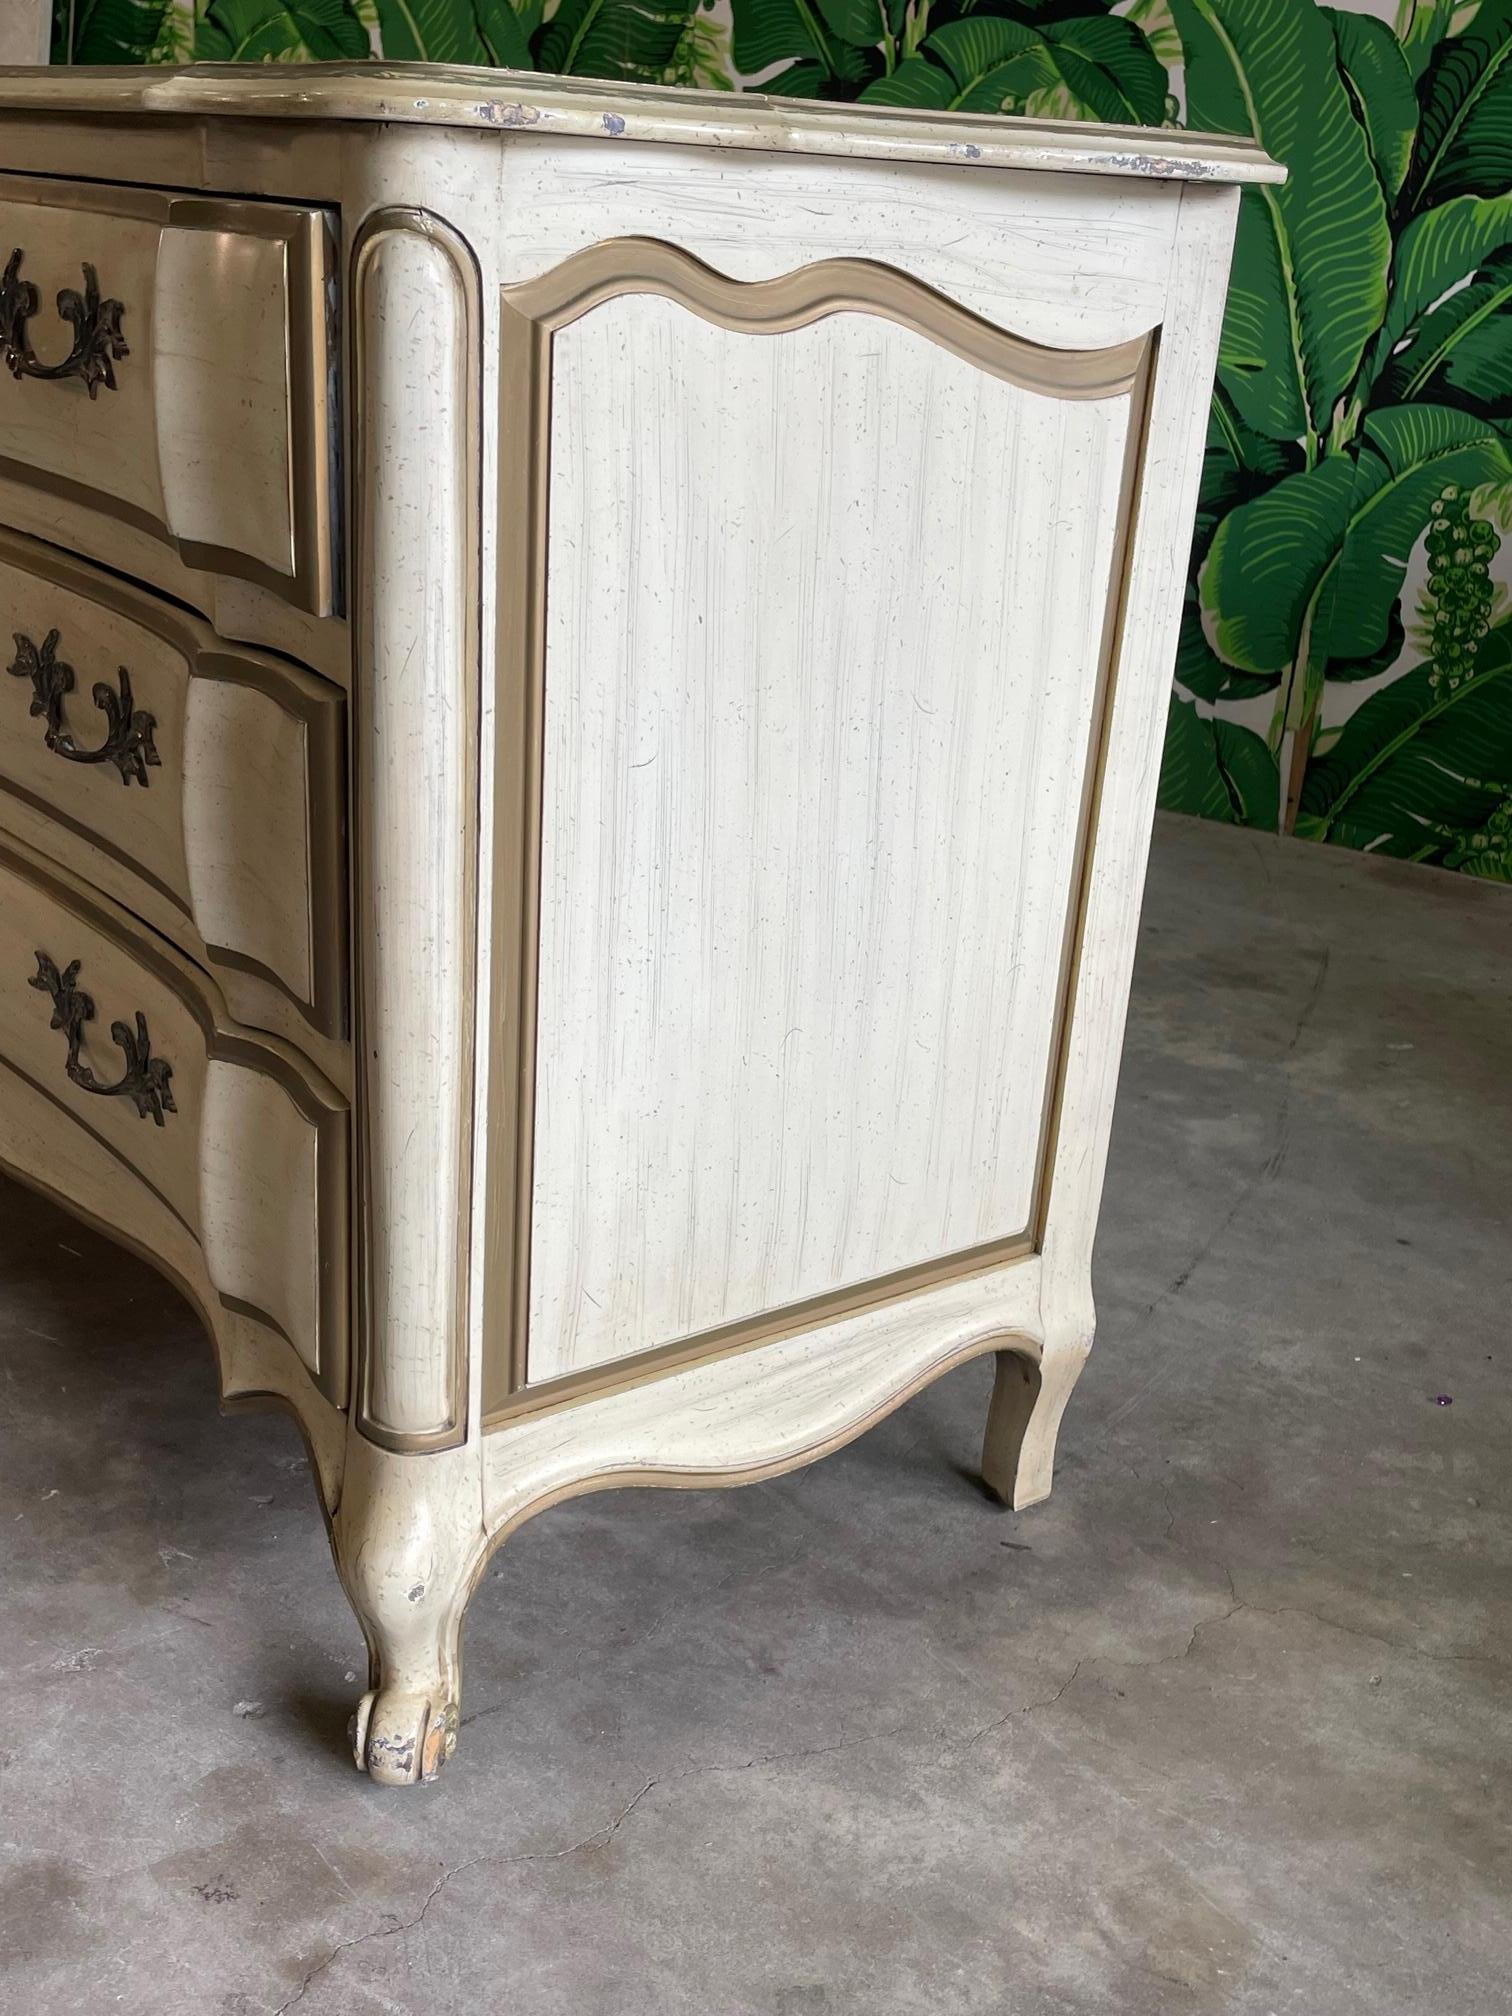 French Provincial Bombe Dresser by White Furniture 1